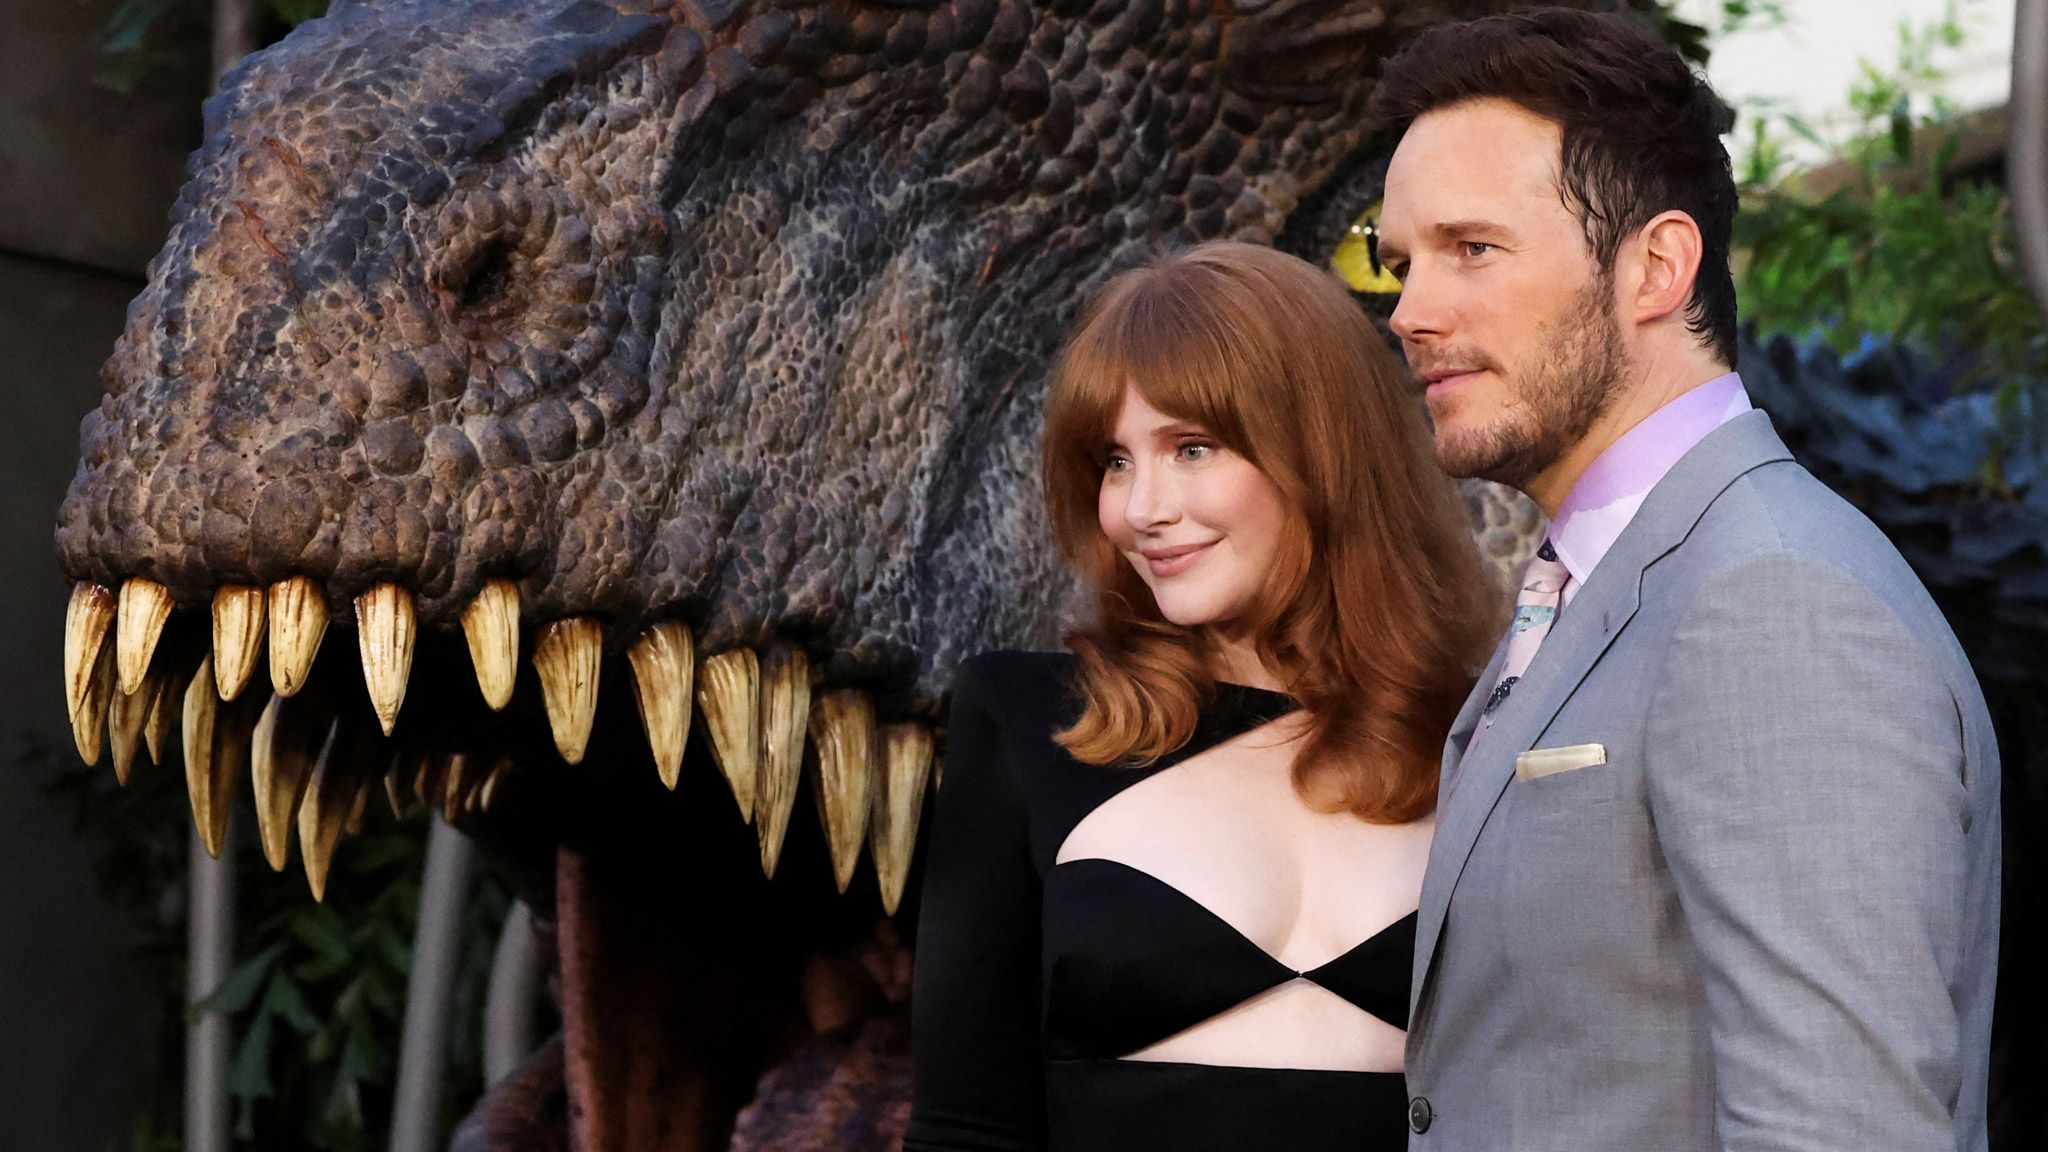 Bryce Dallas Howard and Chris Pratt posing in front of dinosaur jaws premiere for Jurassic World Dominion